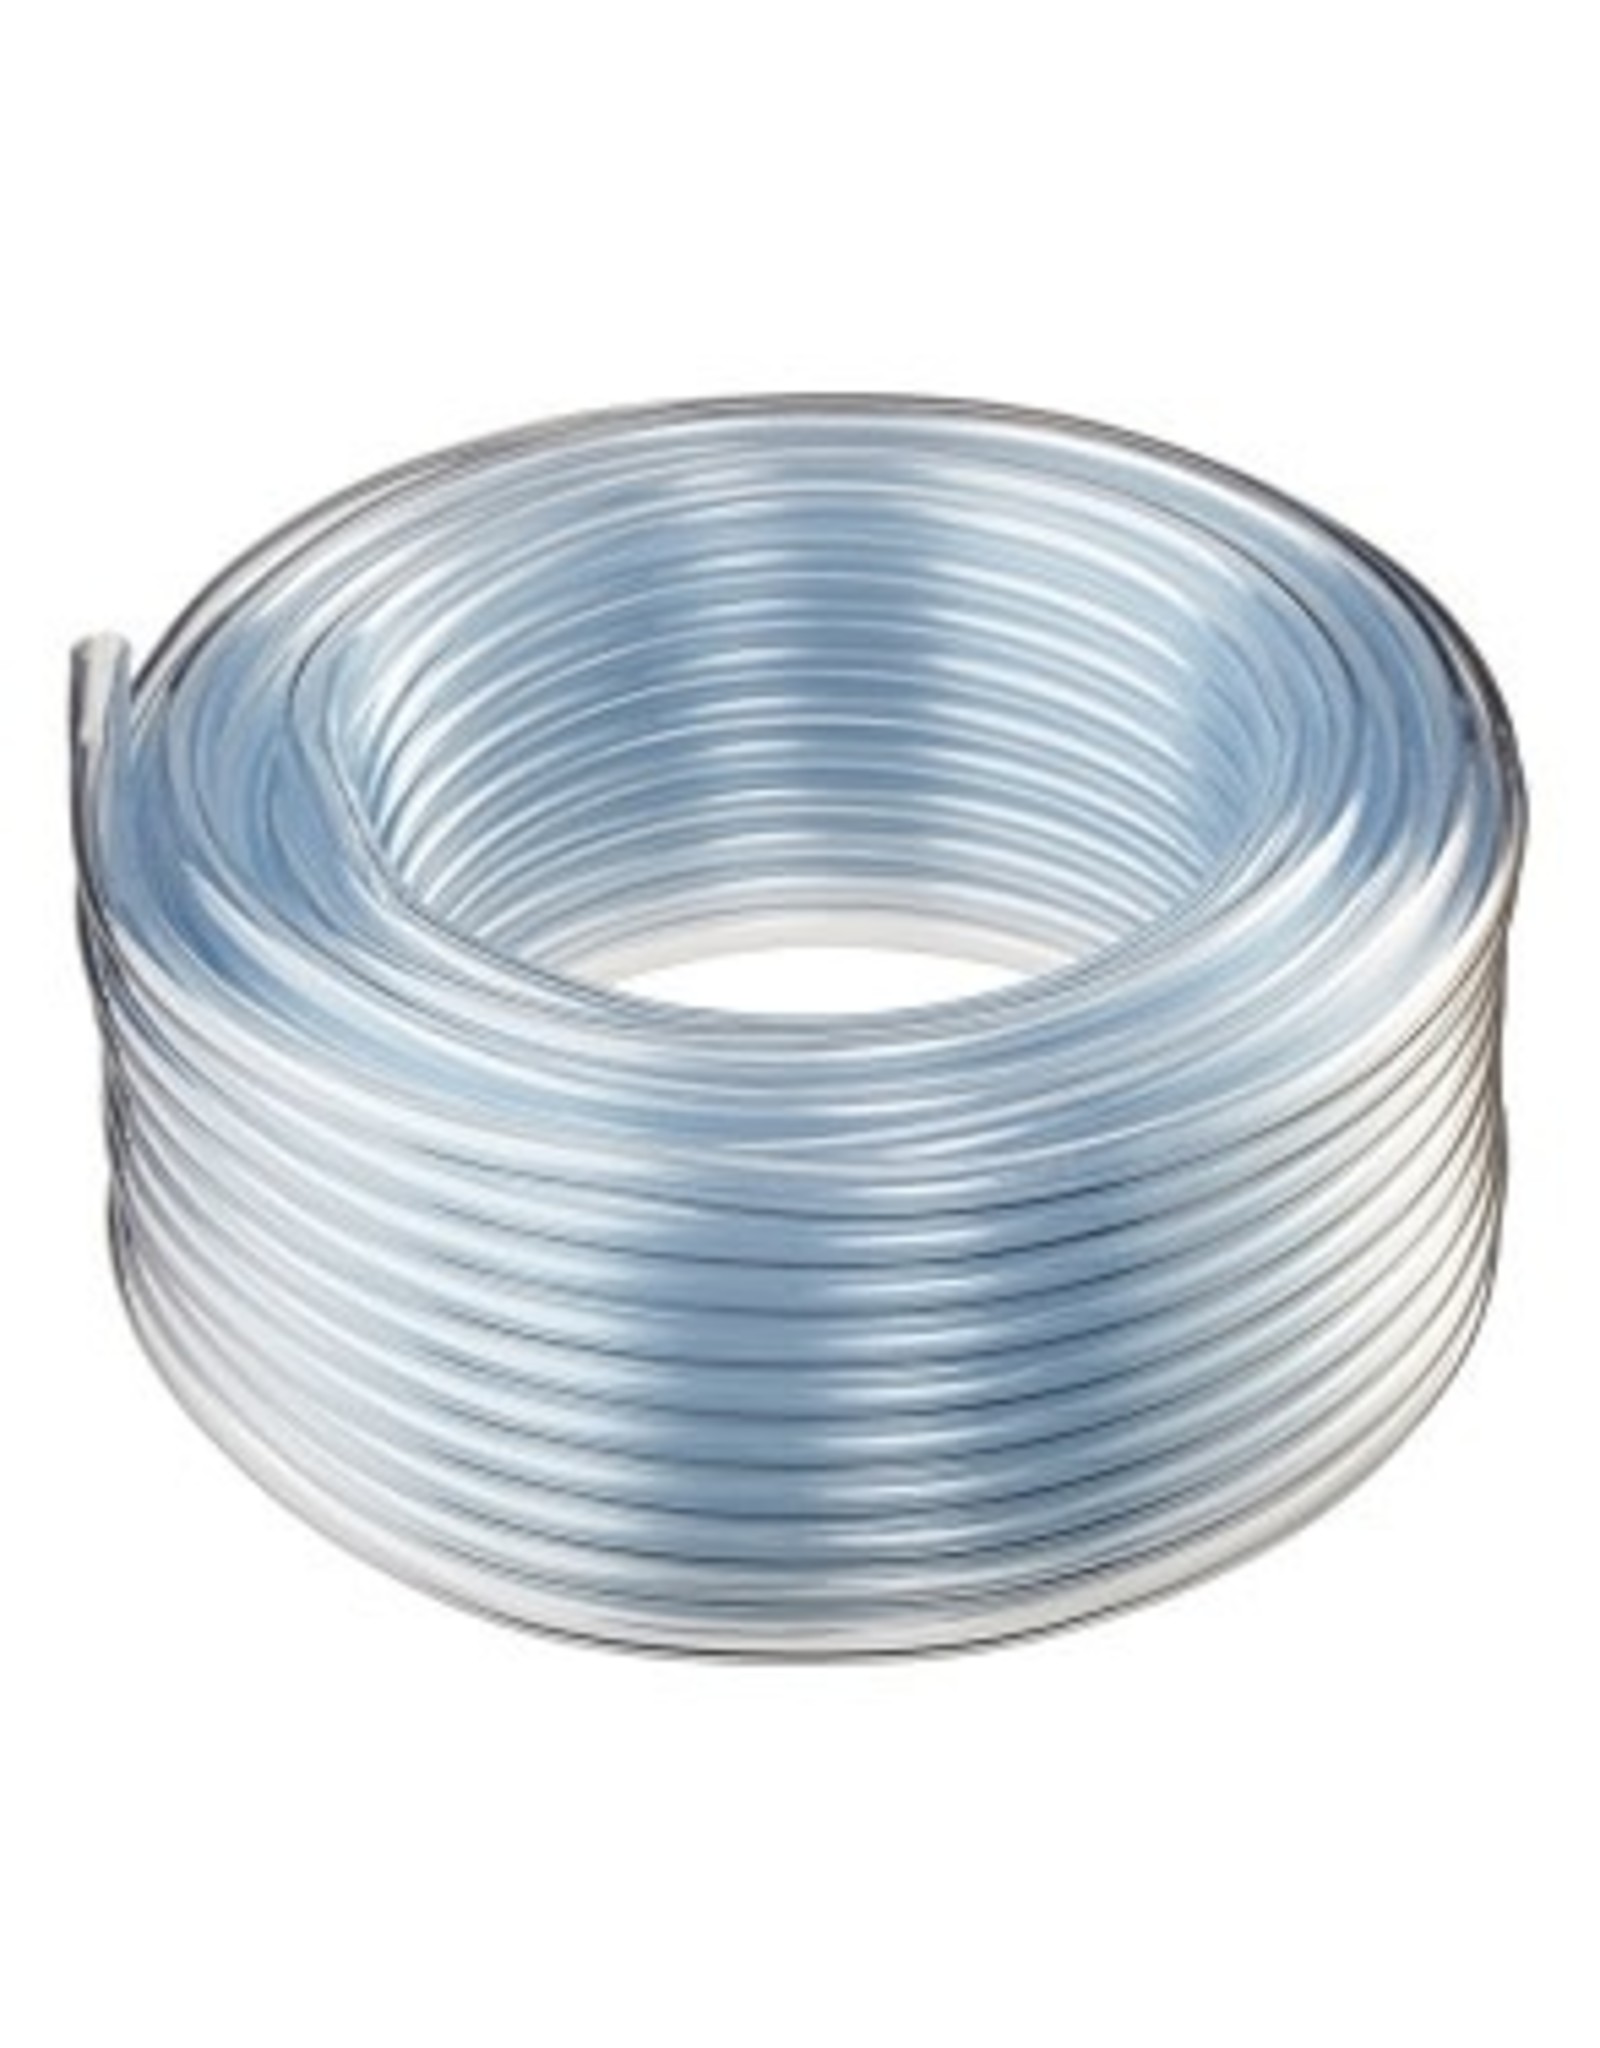 DL Wholesale 1/4'' x 1000' Clear Food Grade Poly Tubing (Sold By The Foot)